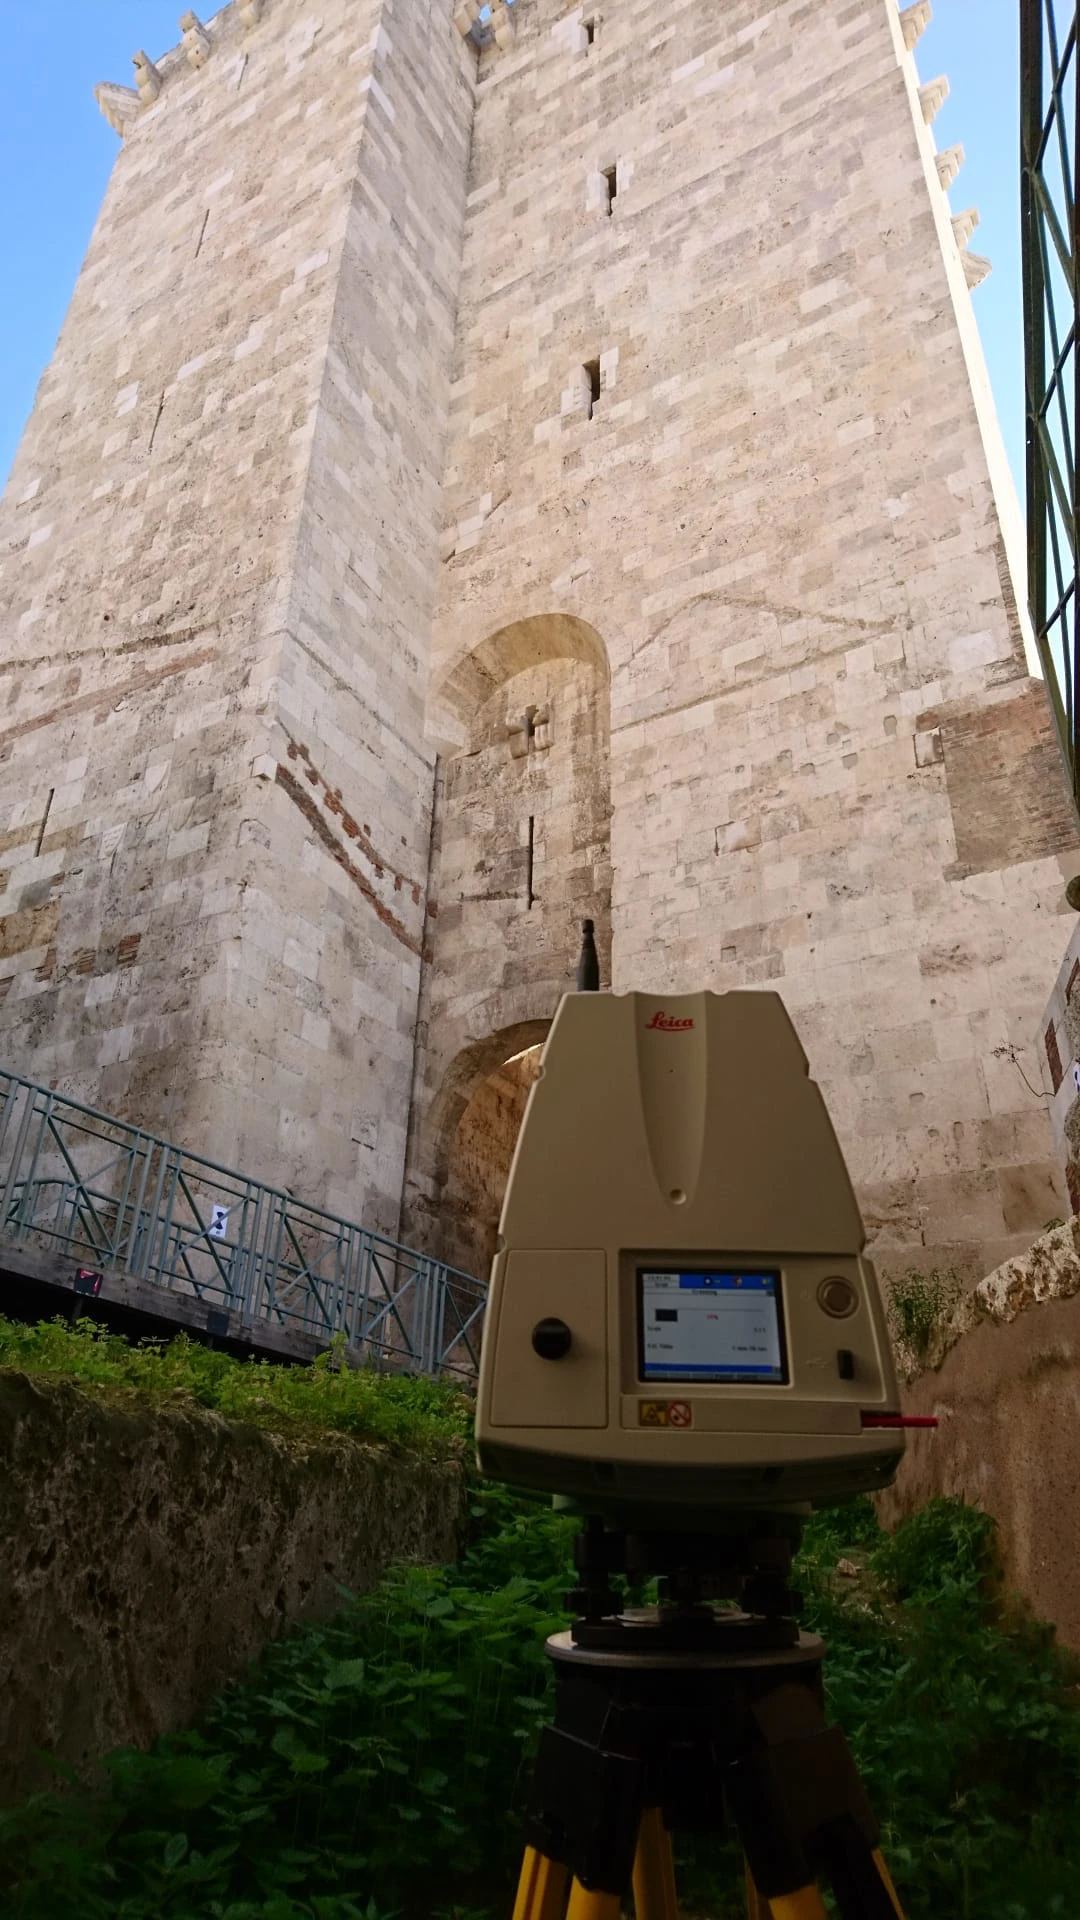 External view of St Pancras Tower - Cagliari - Archimeter